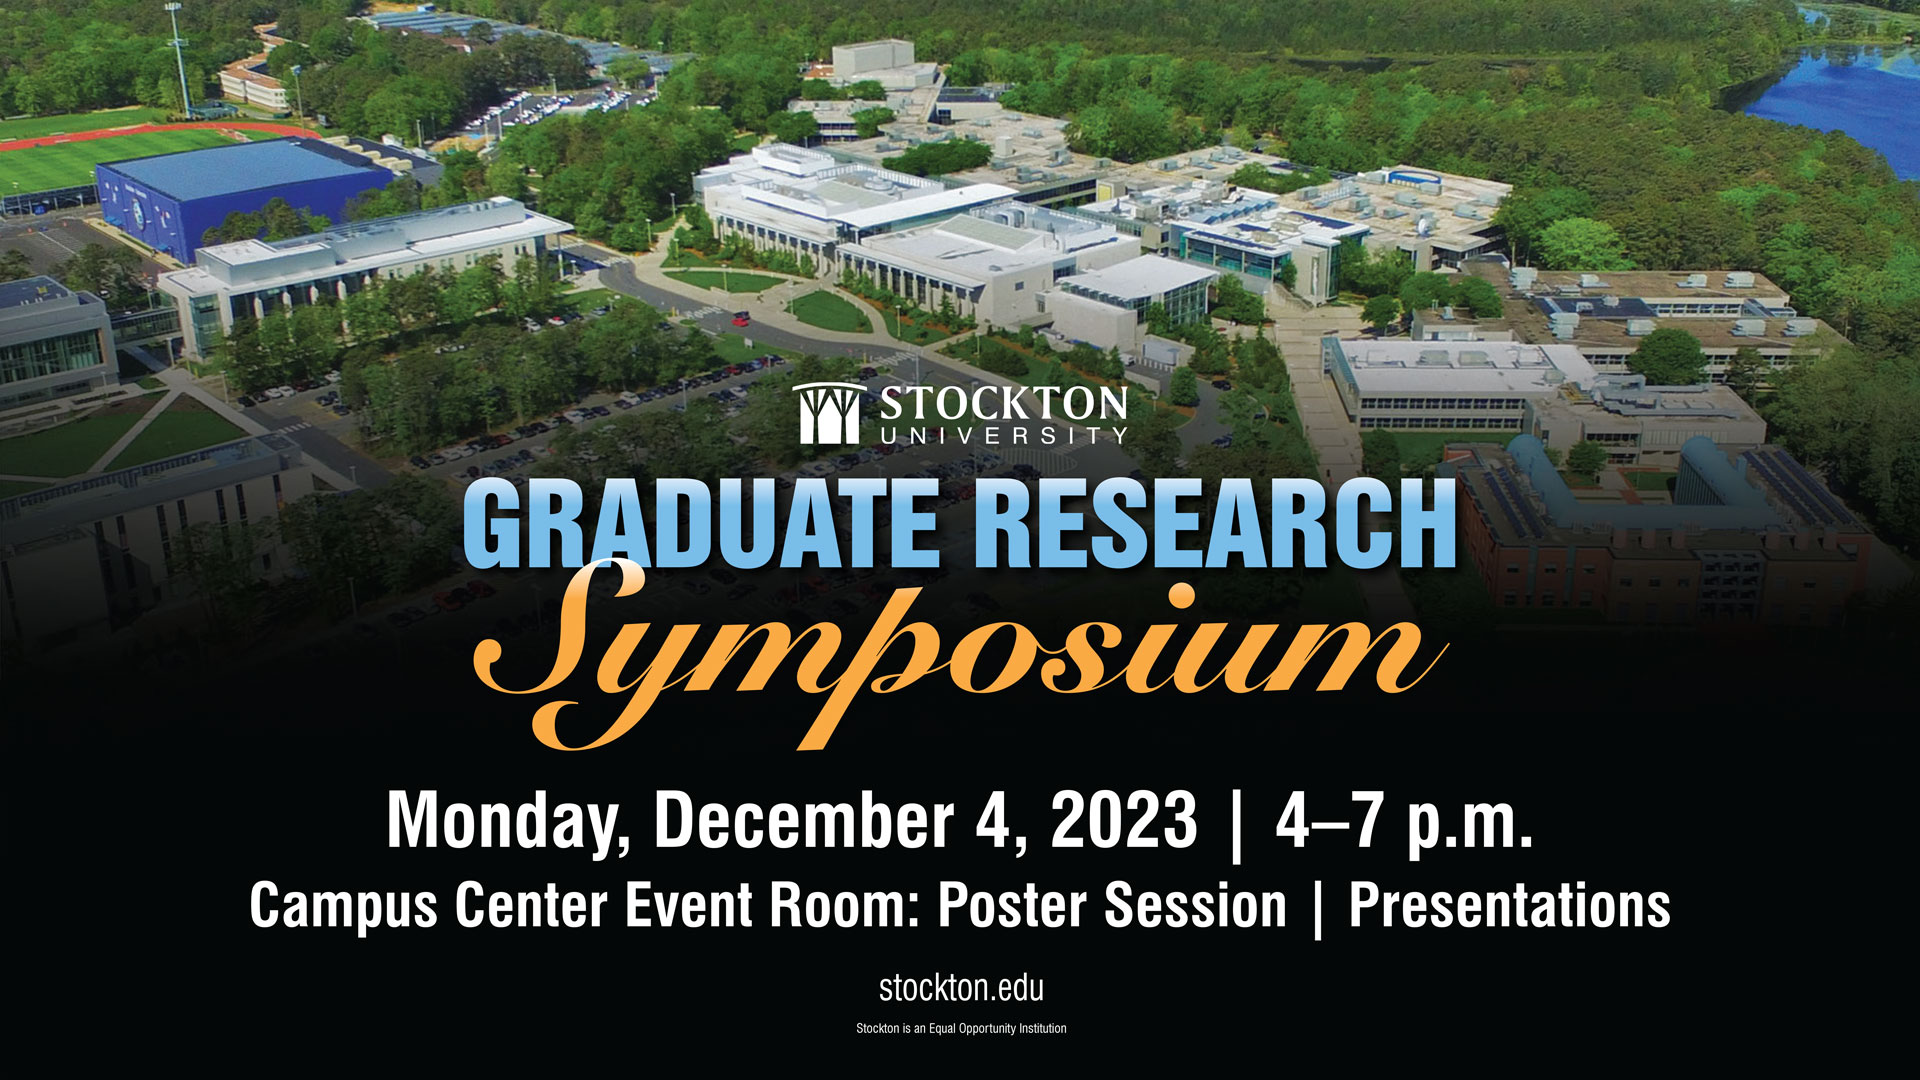 Graduate Research Symposium - Tuesday, May 3, 2022 from 6鈥�8 p.m - Location:  C/D Atrium - Poster Session, C-Wing - Presentations